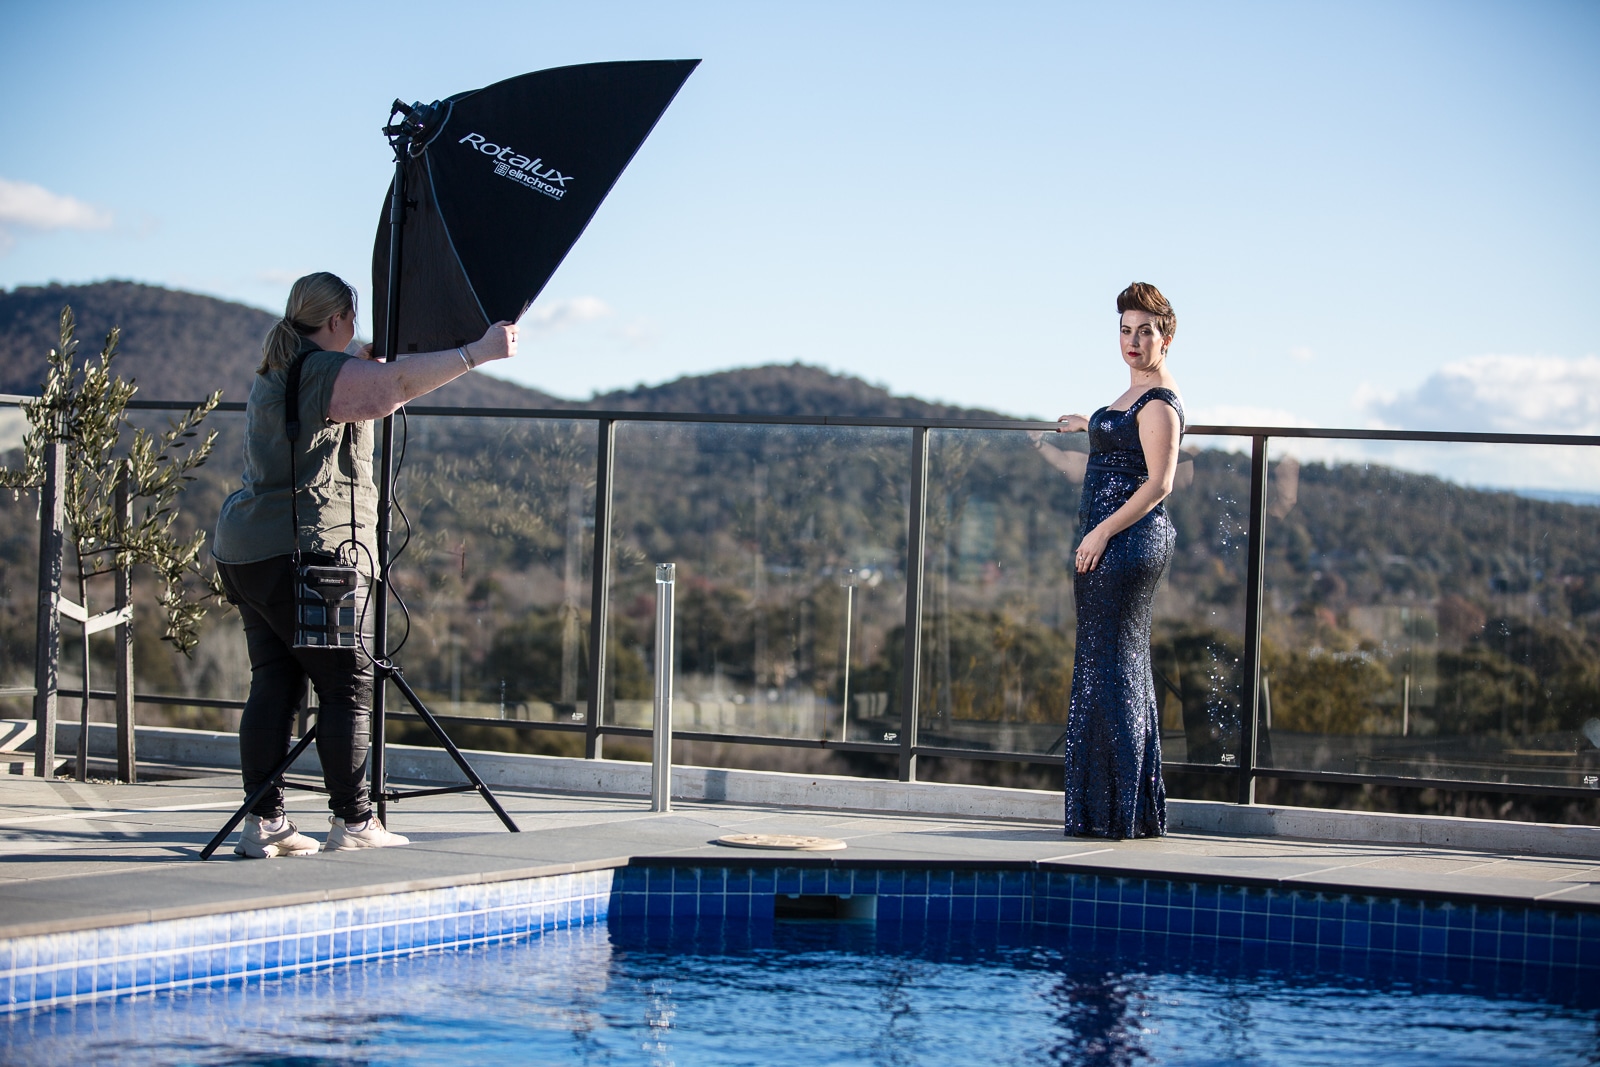 Behind-the-scenes of the pool shoot